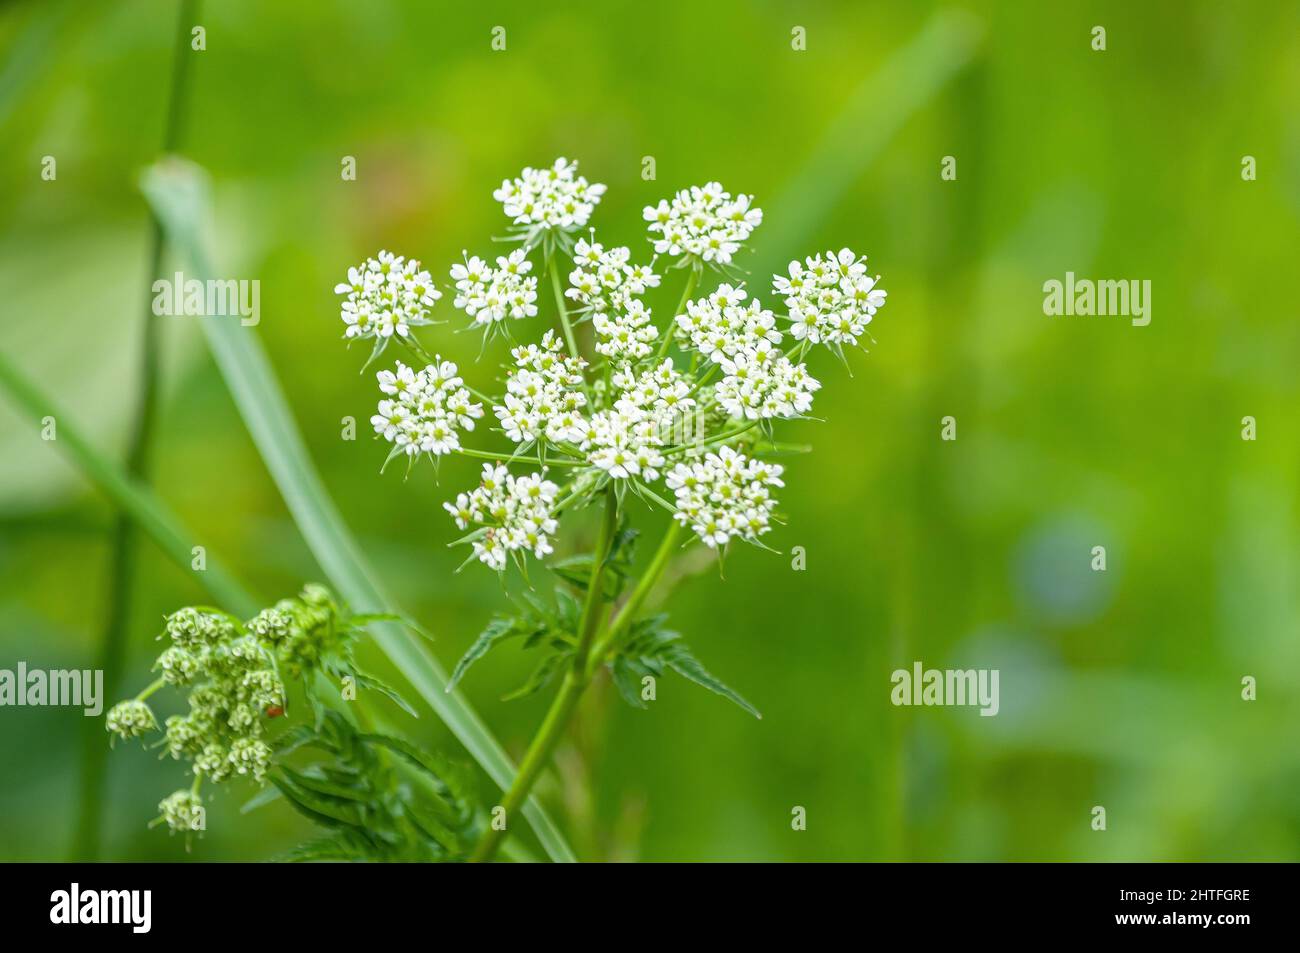 Closeup shot of Chaerophyllum aromaticum flowers with green leaves on a blurred background Stock Photo